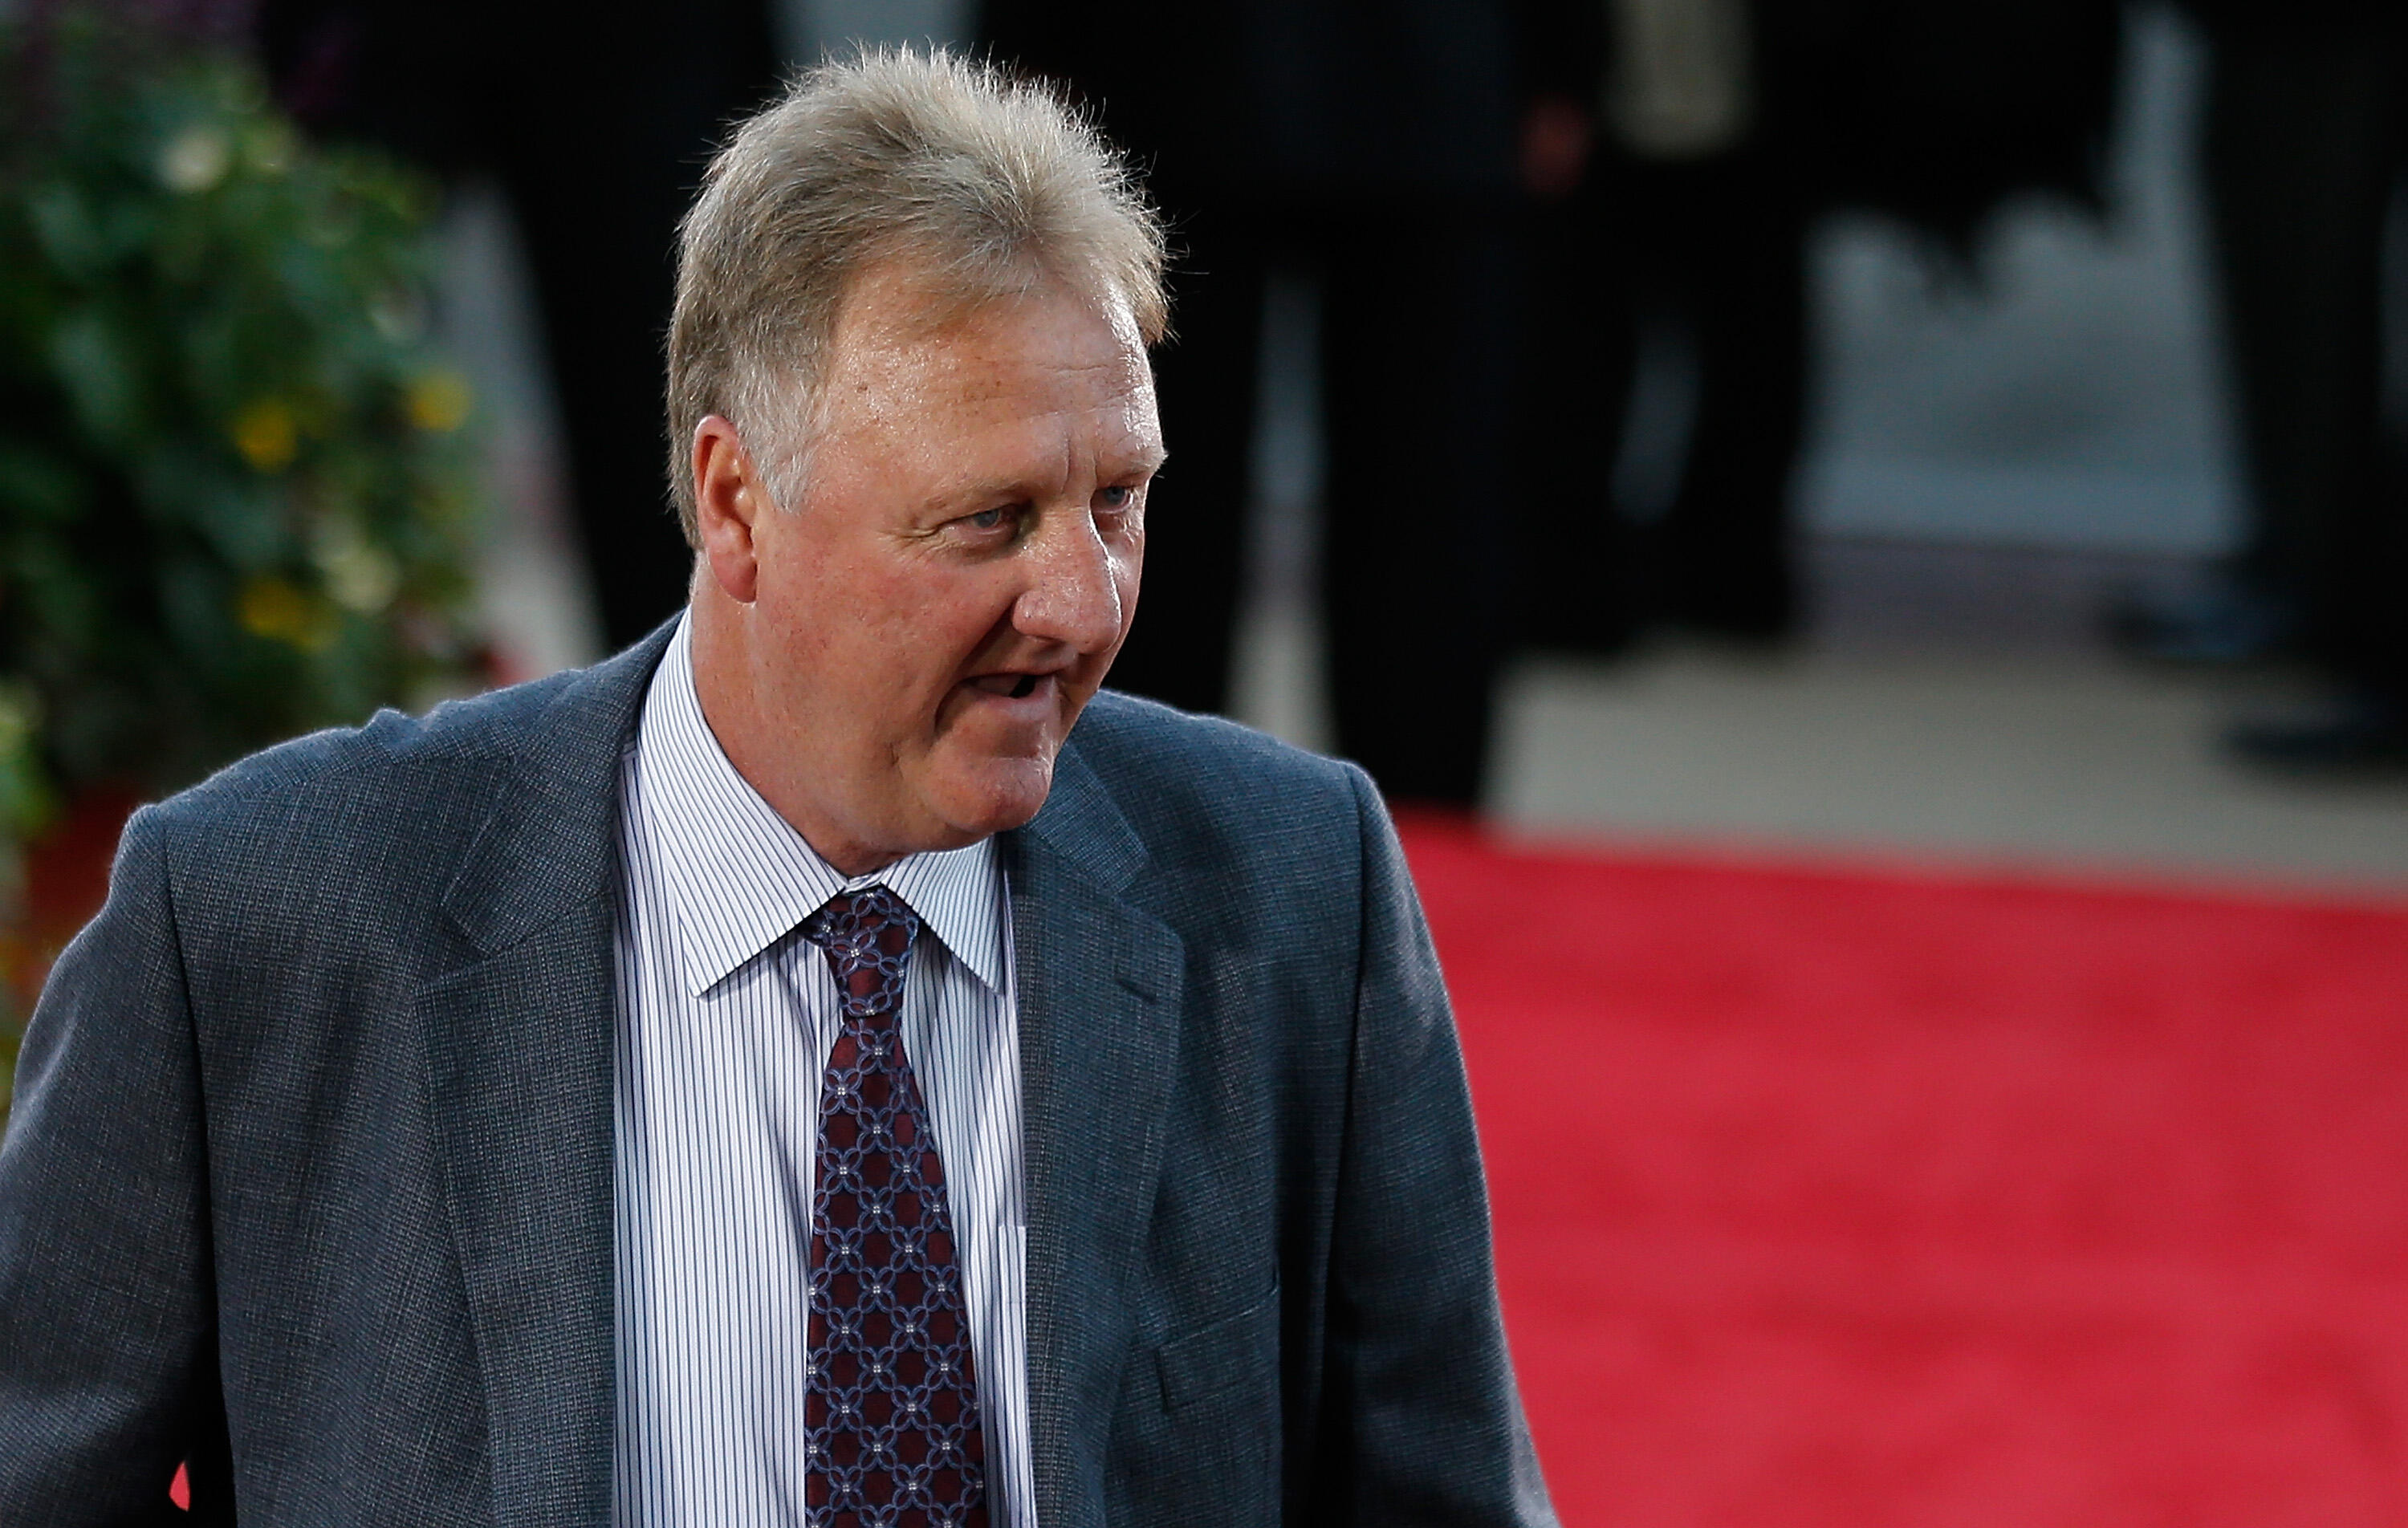 SPRINGFIELD, MA - AUGUST 8: Larry Bird  arrives for the 2014 Basketball Hall of Fame Enshrinement Ceremonyat Symphony Hall on August 8, 2014 in Springfield, Massachusetts. (Photo by Jim Rogash/Getty Images)